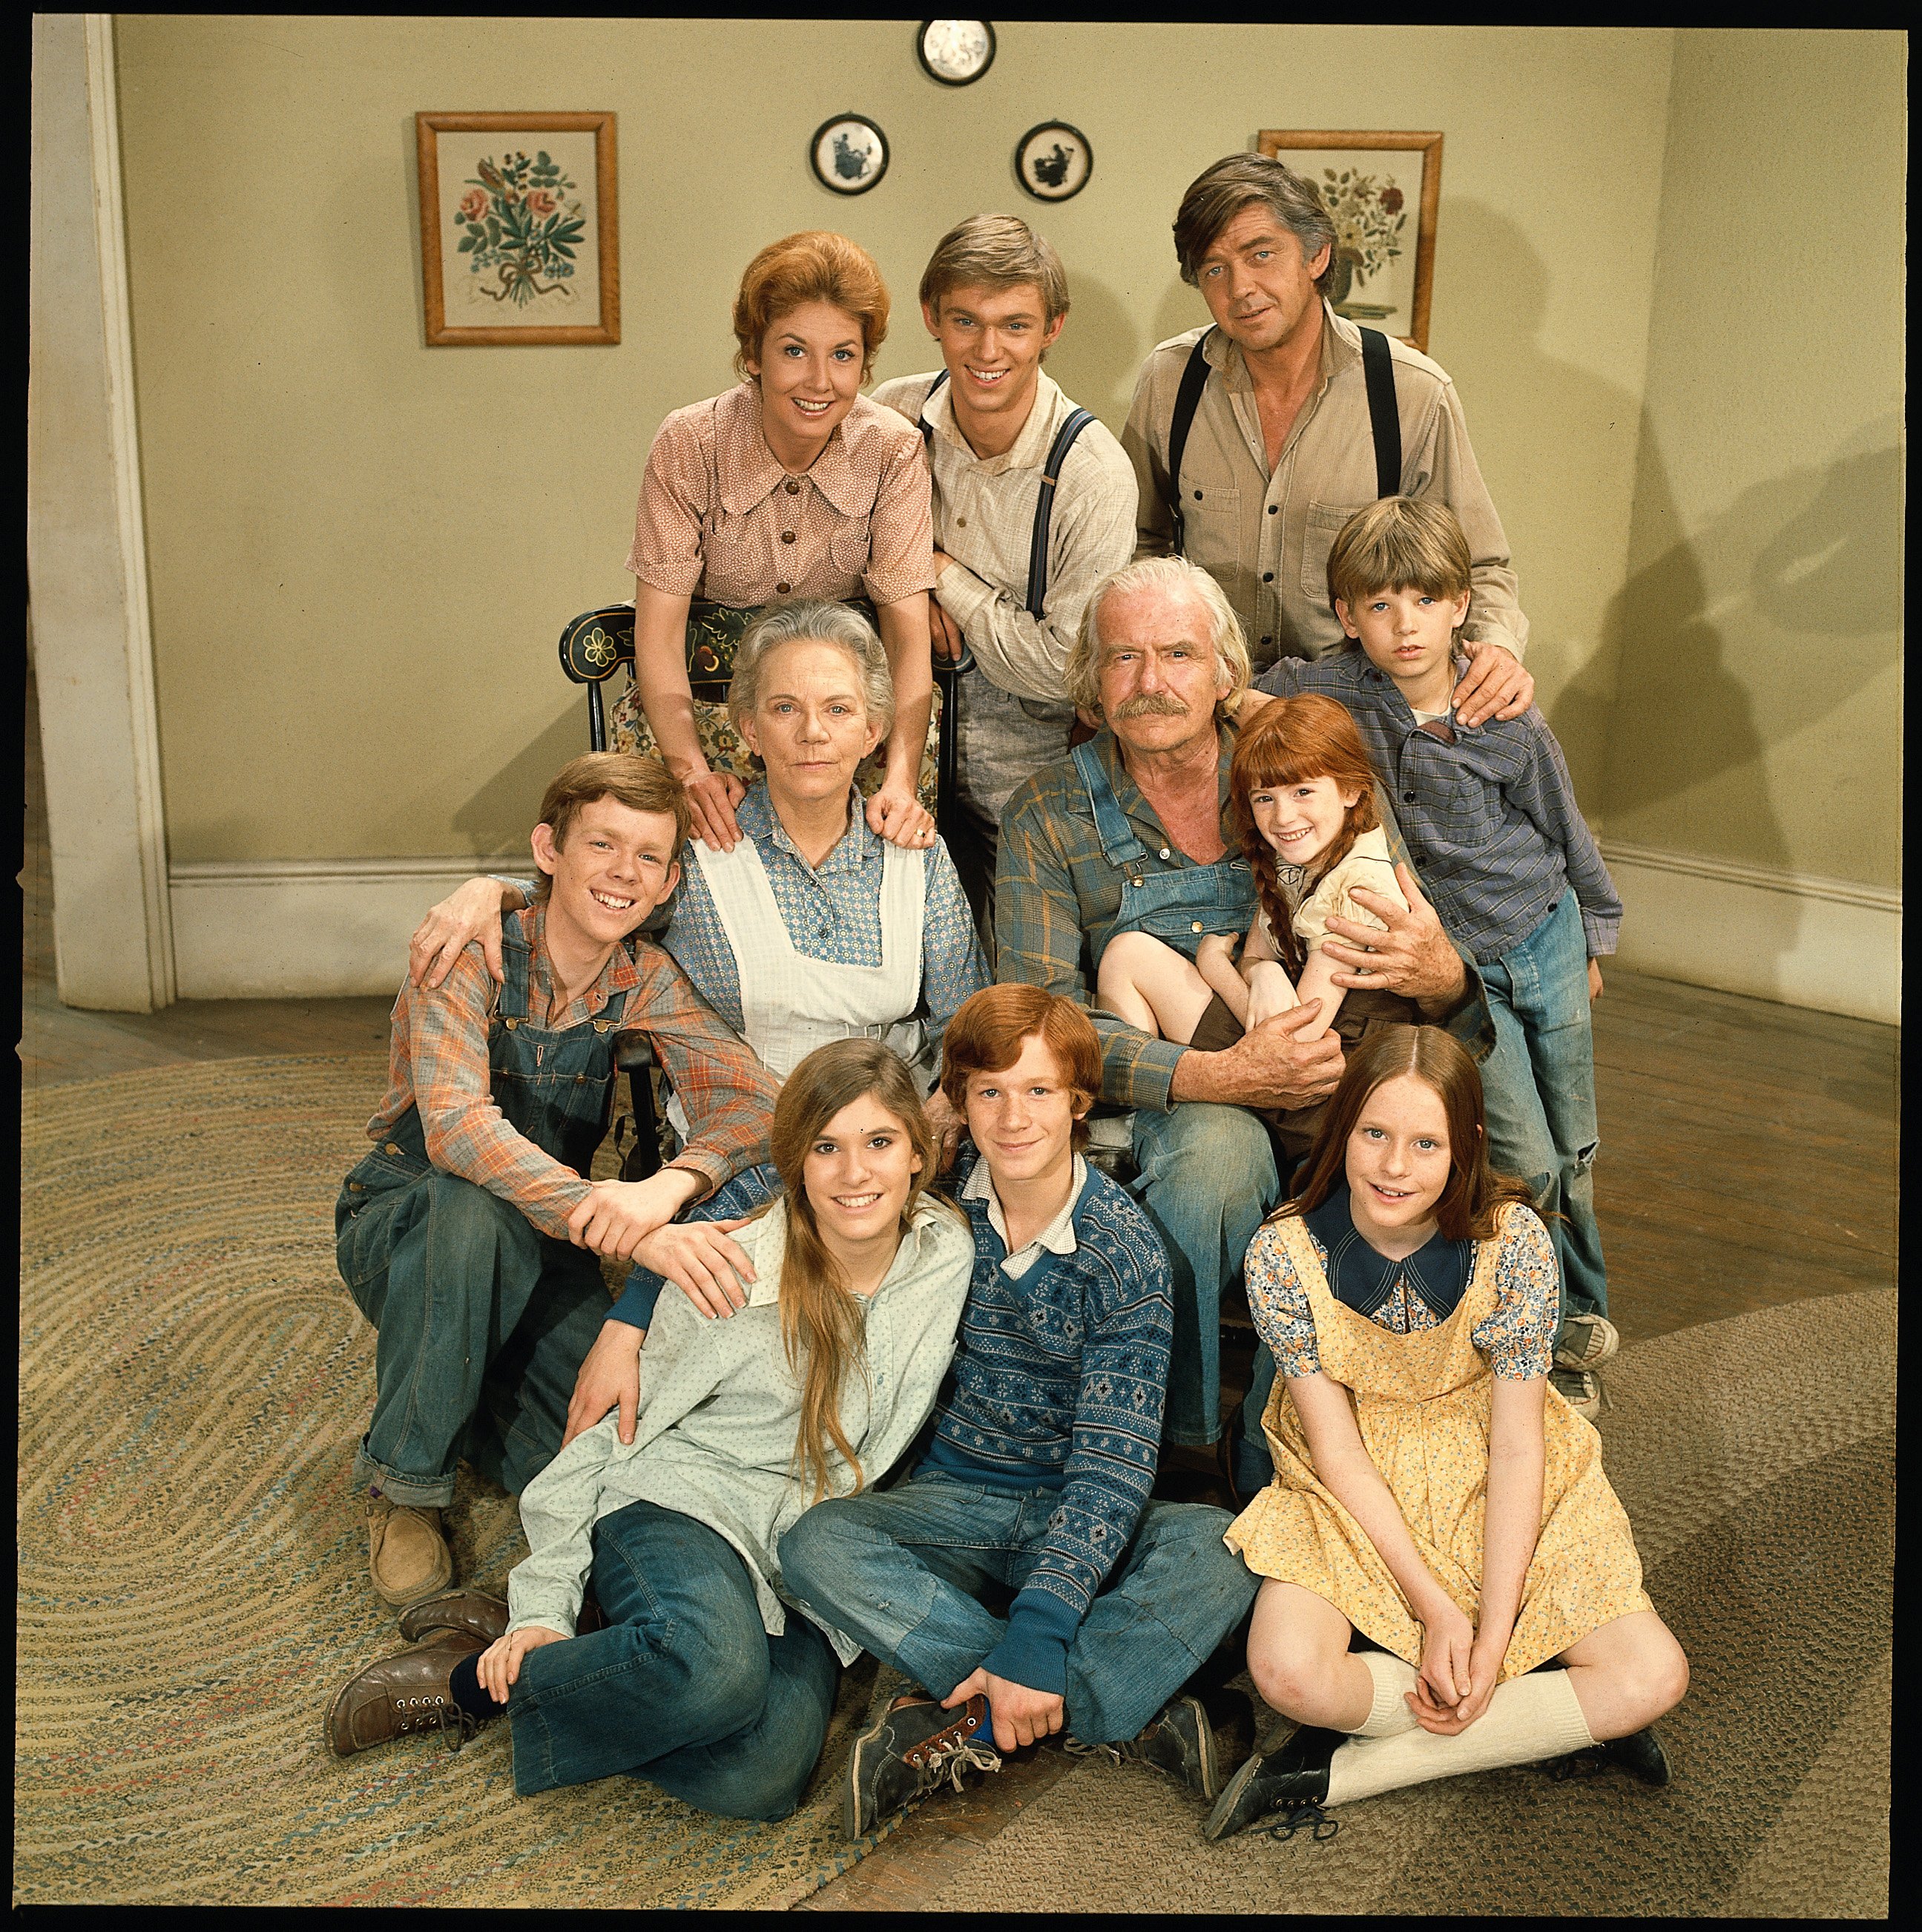 The cast of the drama series "The Waltons" poses for a promotional photo. L-R: (back row) Michael Learned, Richard Thomas and Ralph Waite; (C) Jon Walmsley, Ellen Corby, Will Geer, Kami Cotler and David W. Harper; (B) Judy Norton Taylor, Eric Scott and Elizabeth McDonough in 1972 ┃Source: Getty Images